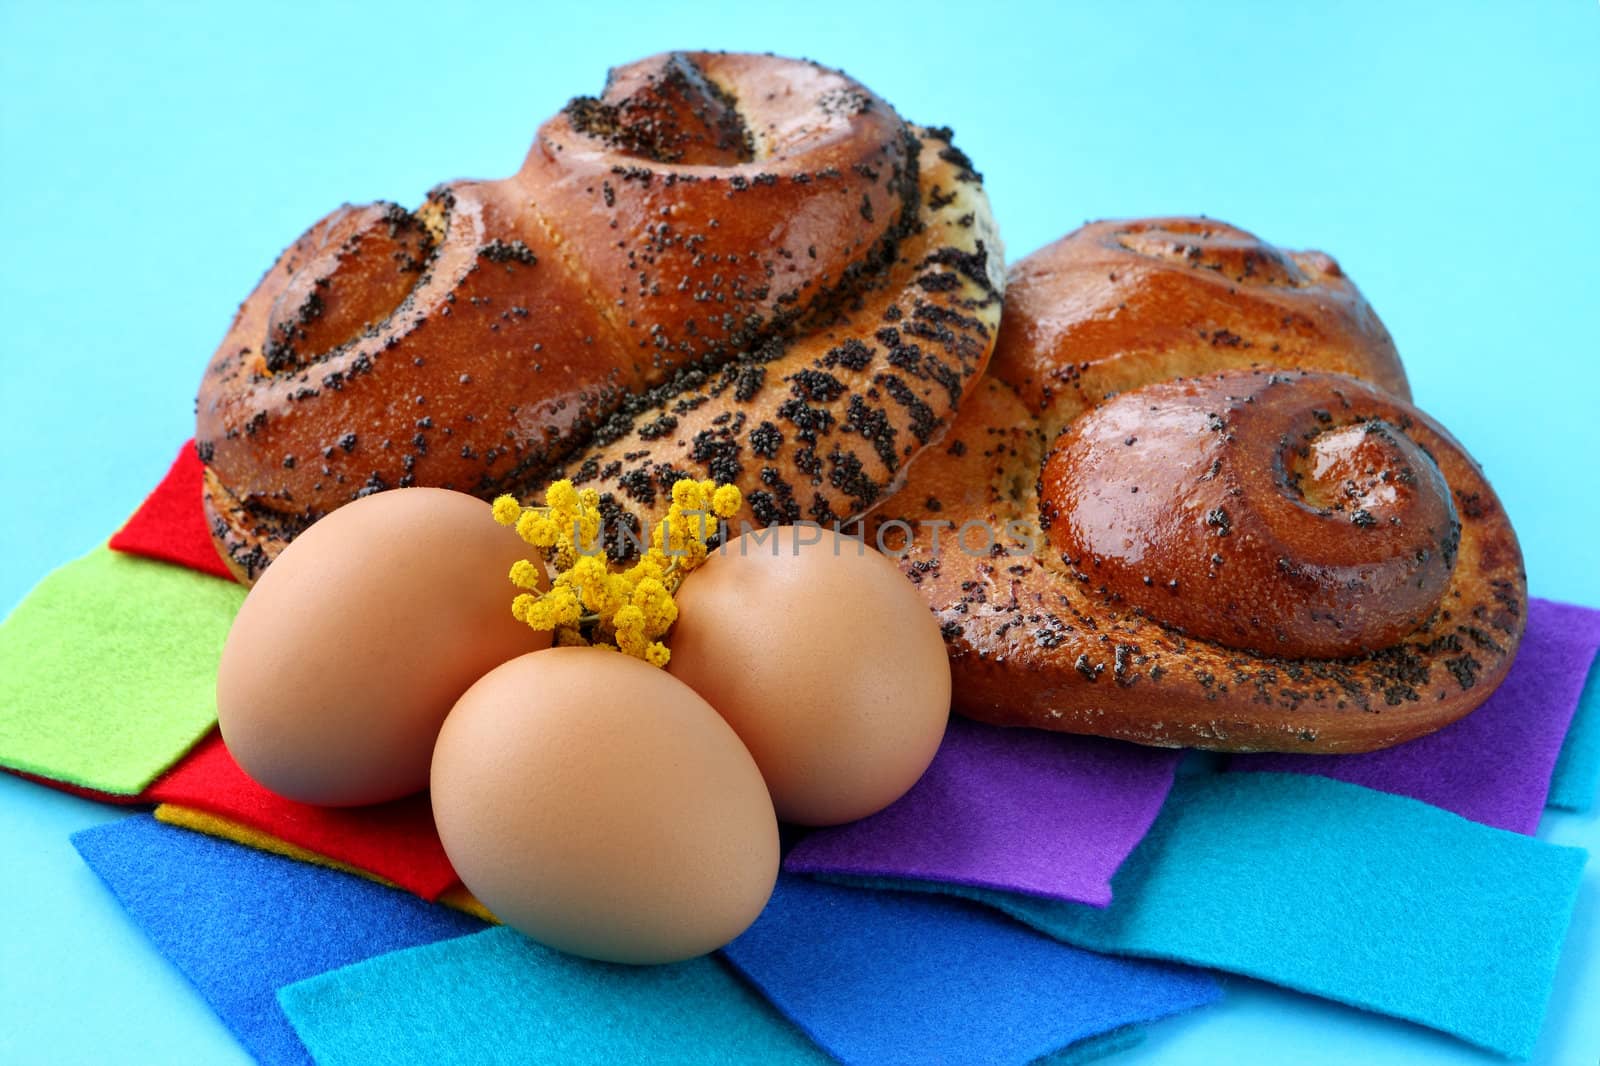 Buns with poppy seeds and brown eggs by pozitivstudija